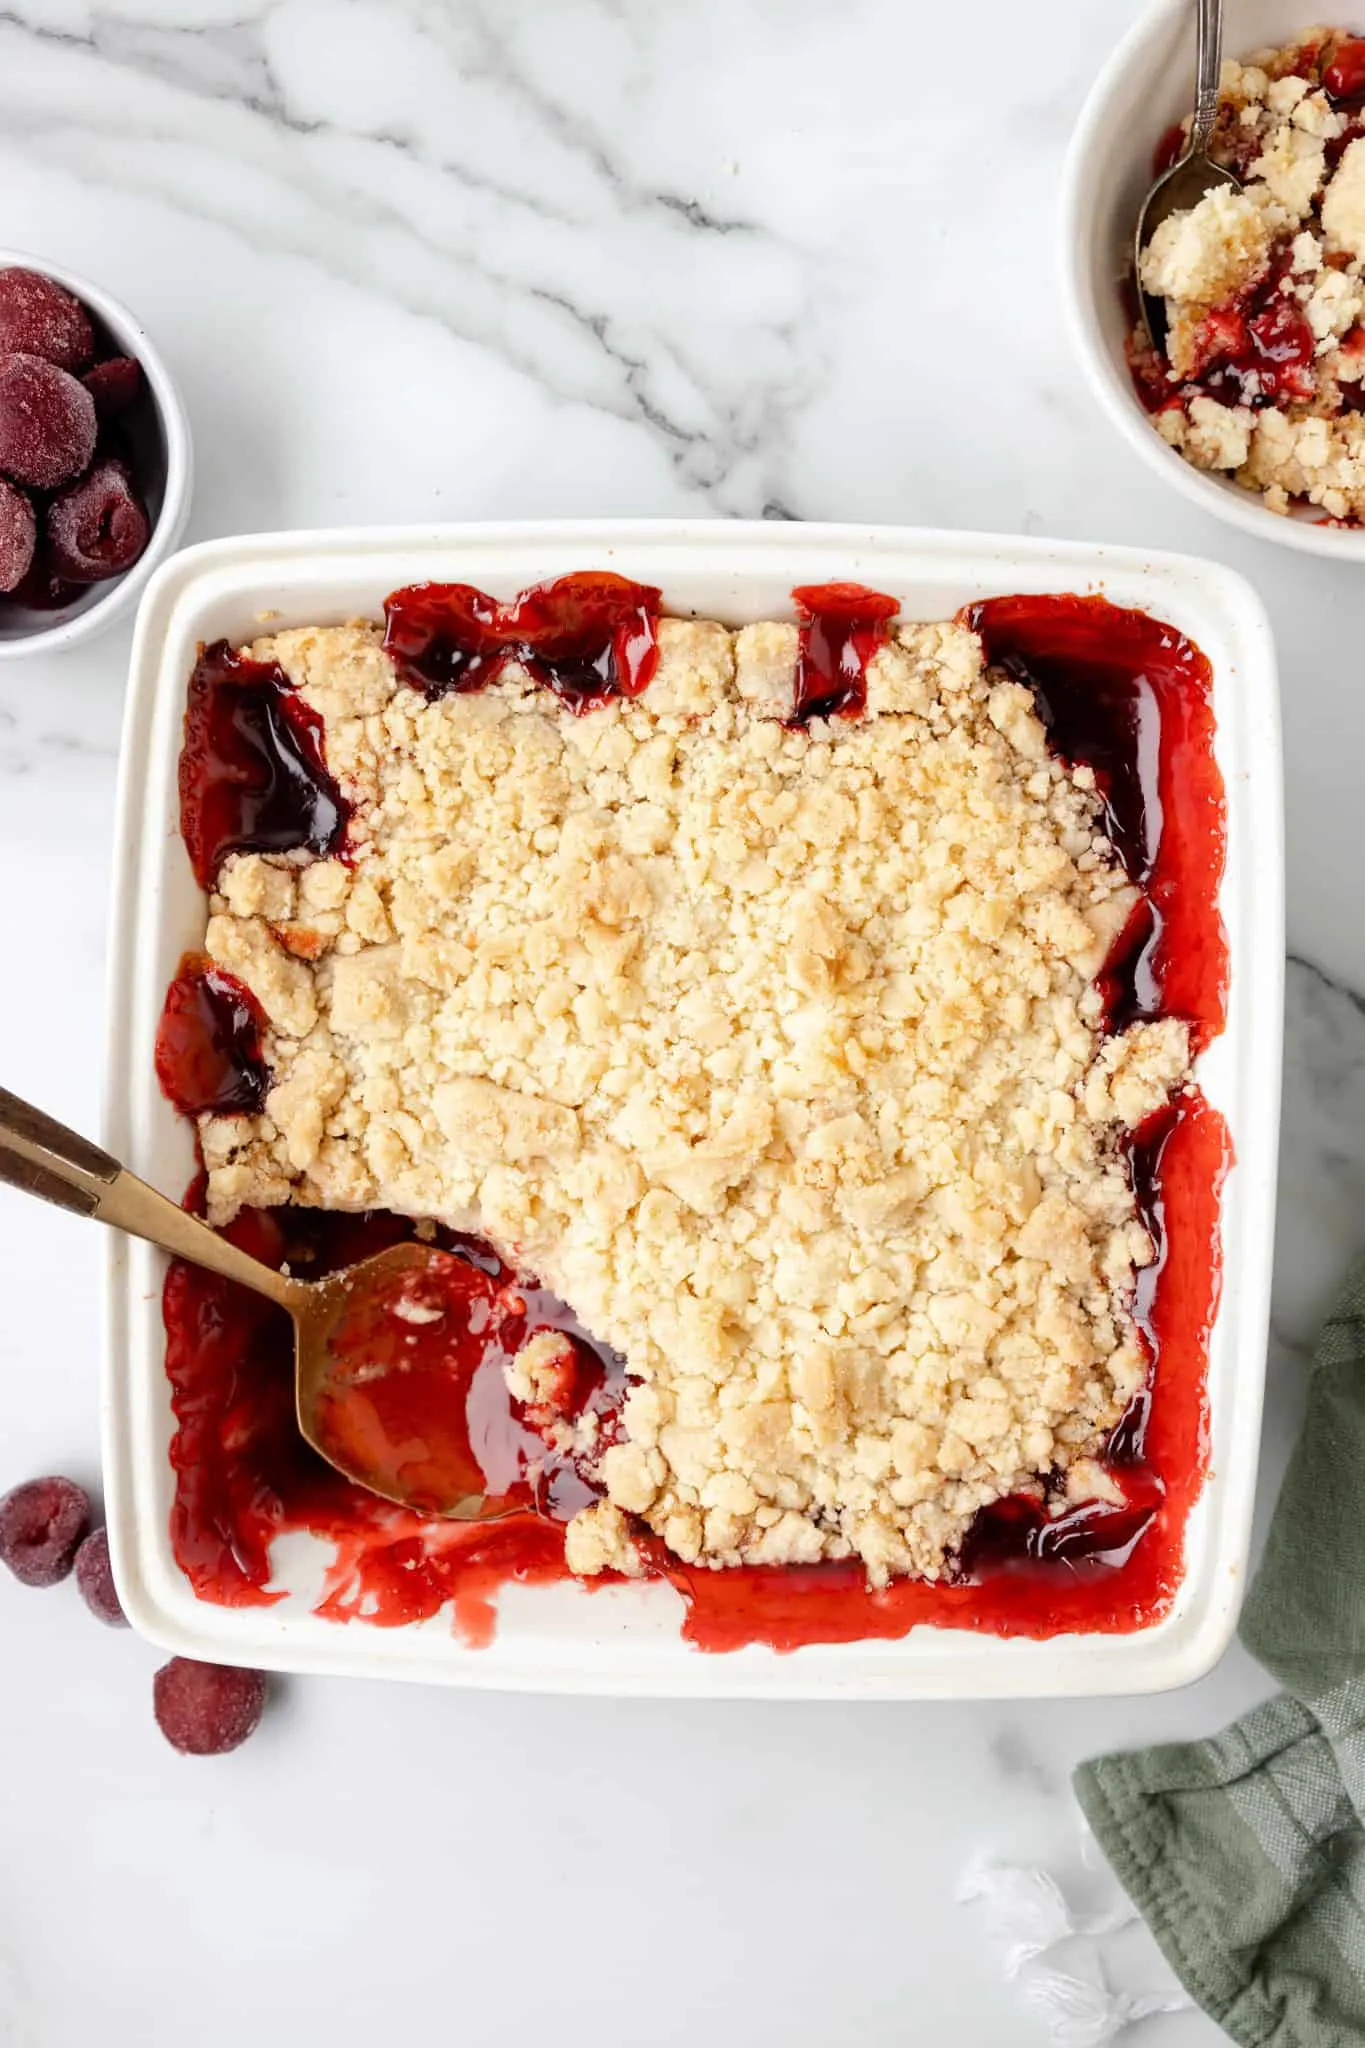 Cherry Cobbler is an easy three ingredient dessert recipe using canned cherry pie filling, sugar cookie mix and butter.